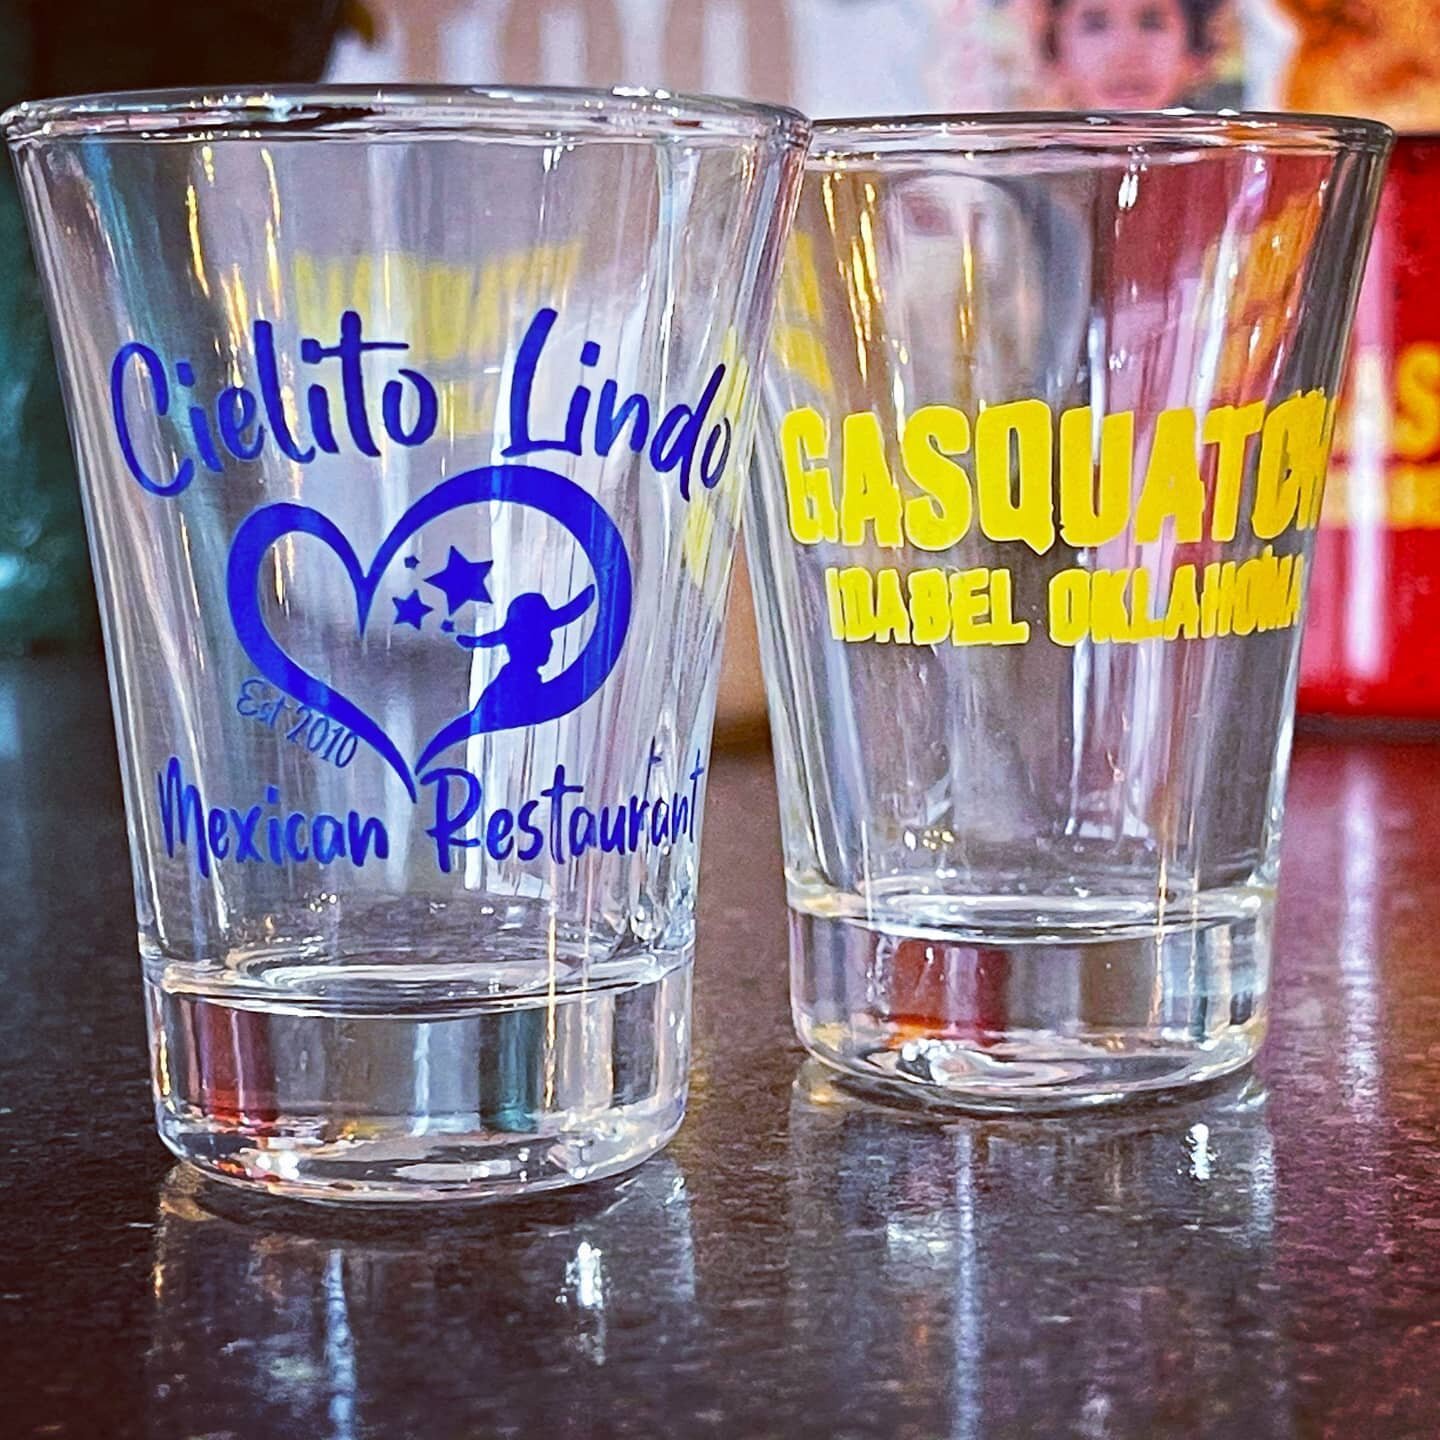 Cielito Lindo and Gasquatch are ready to ring in a new year with new shot glasses!